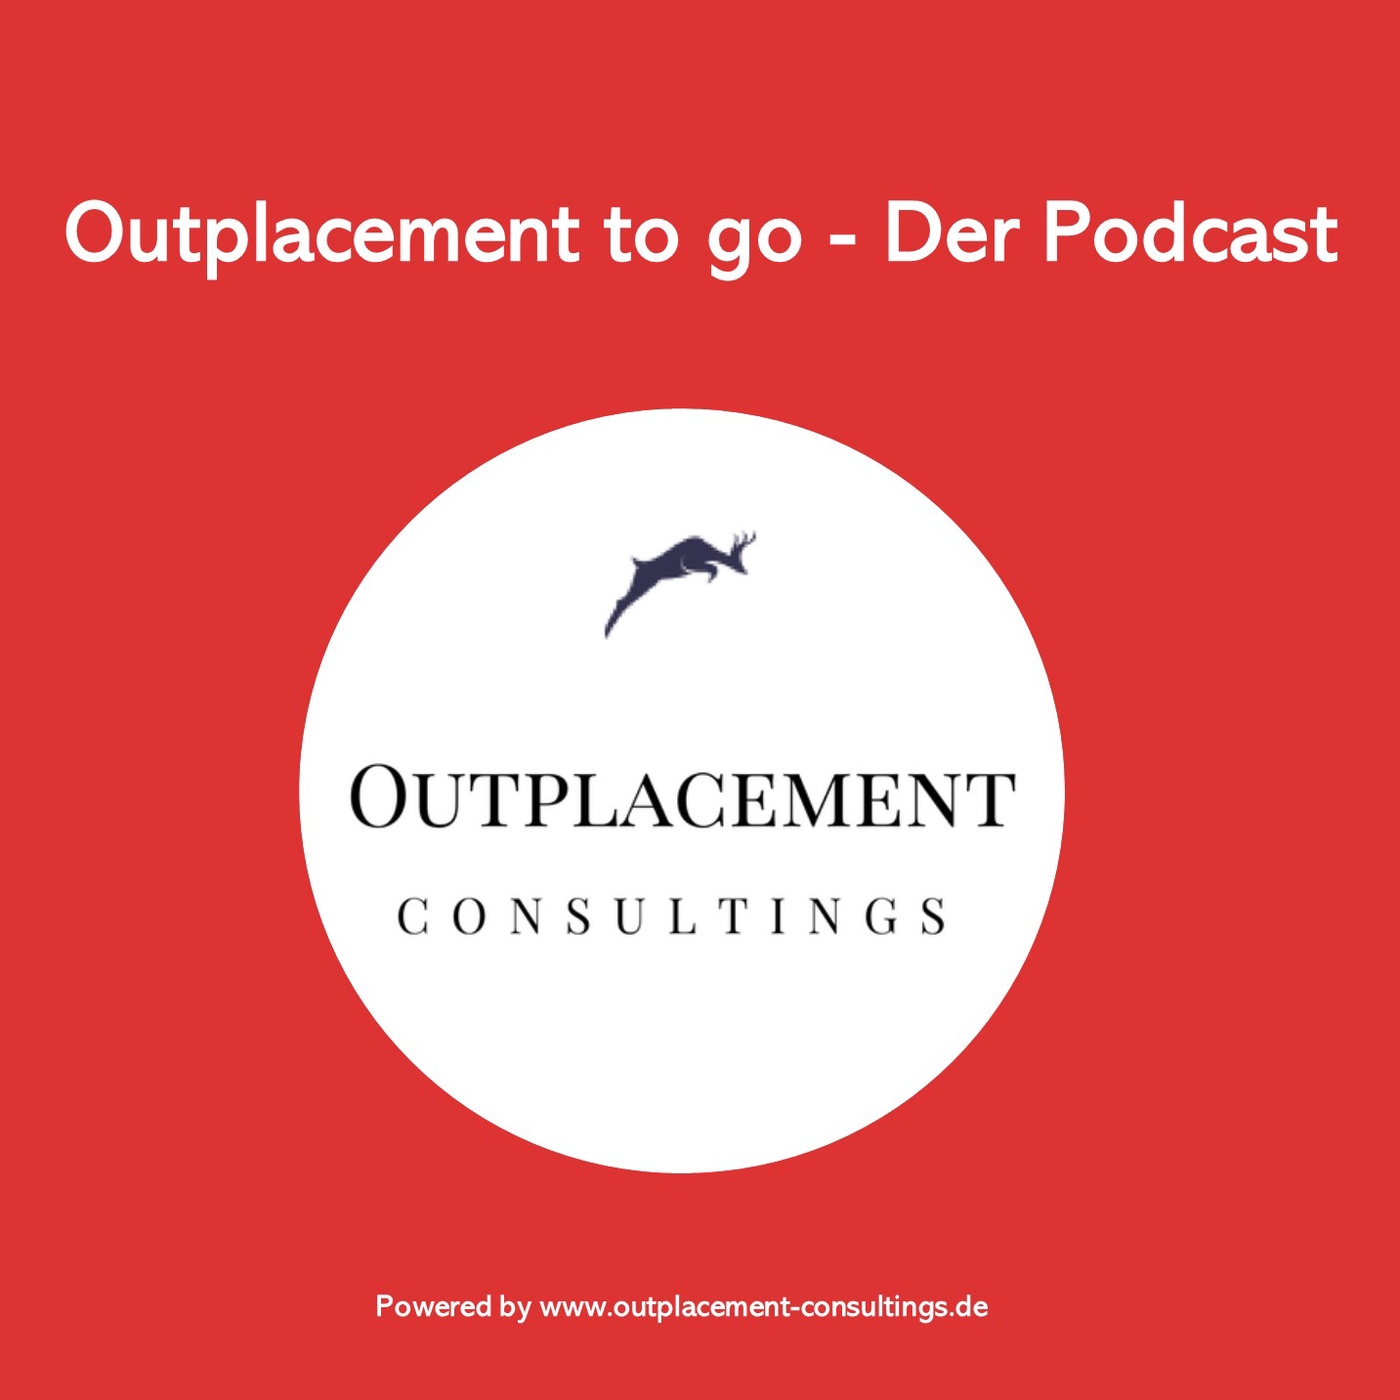 Der Outplacement Podcast | News, Berater-Vorstellungen, Interviews | Outplacement Consultings